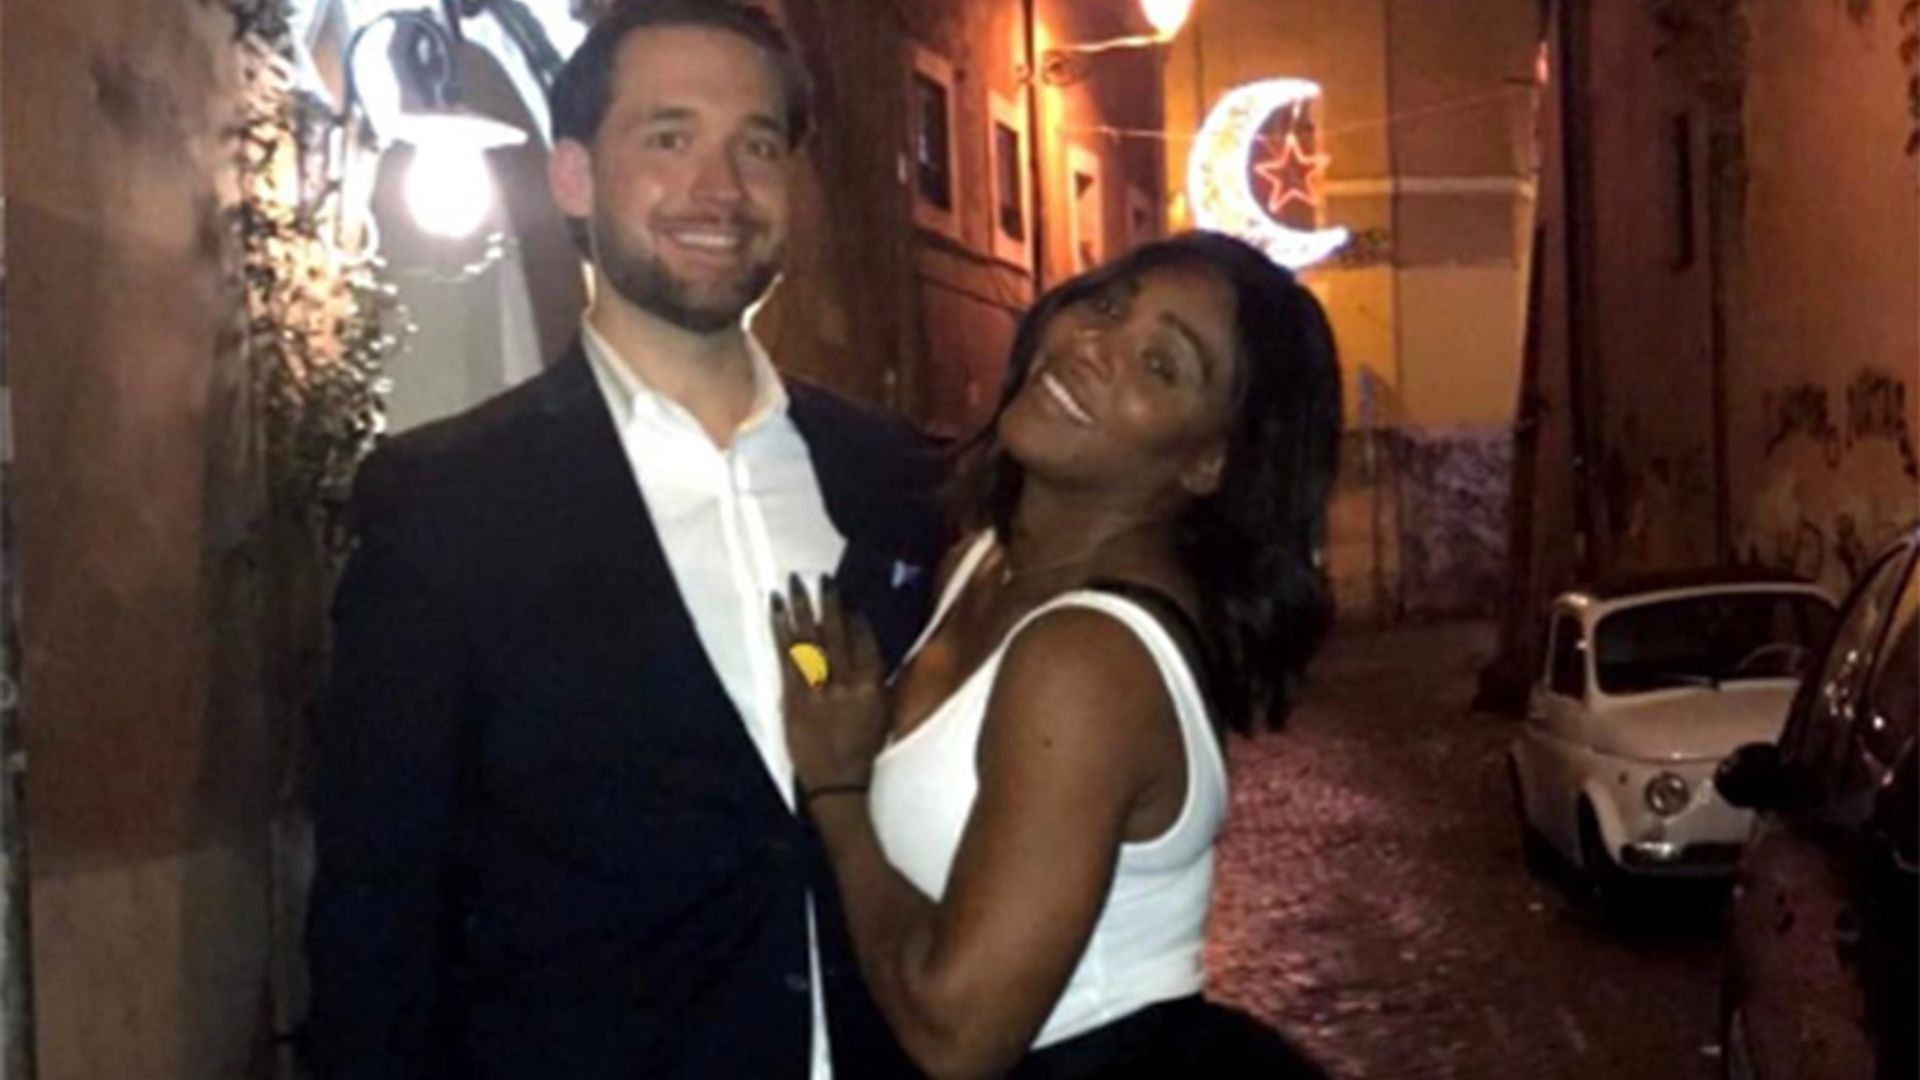 Serena Williams' fiancé praises mum-to-be: 'She has the biggest heart'